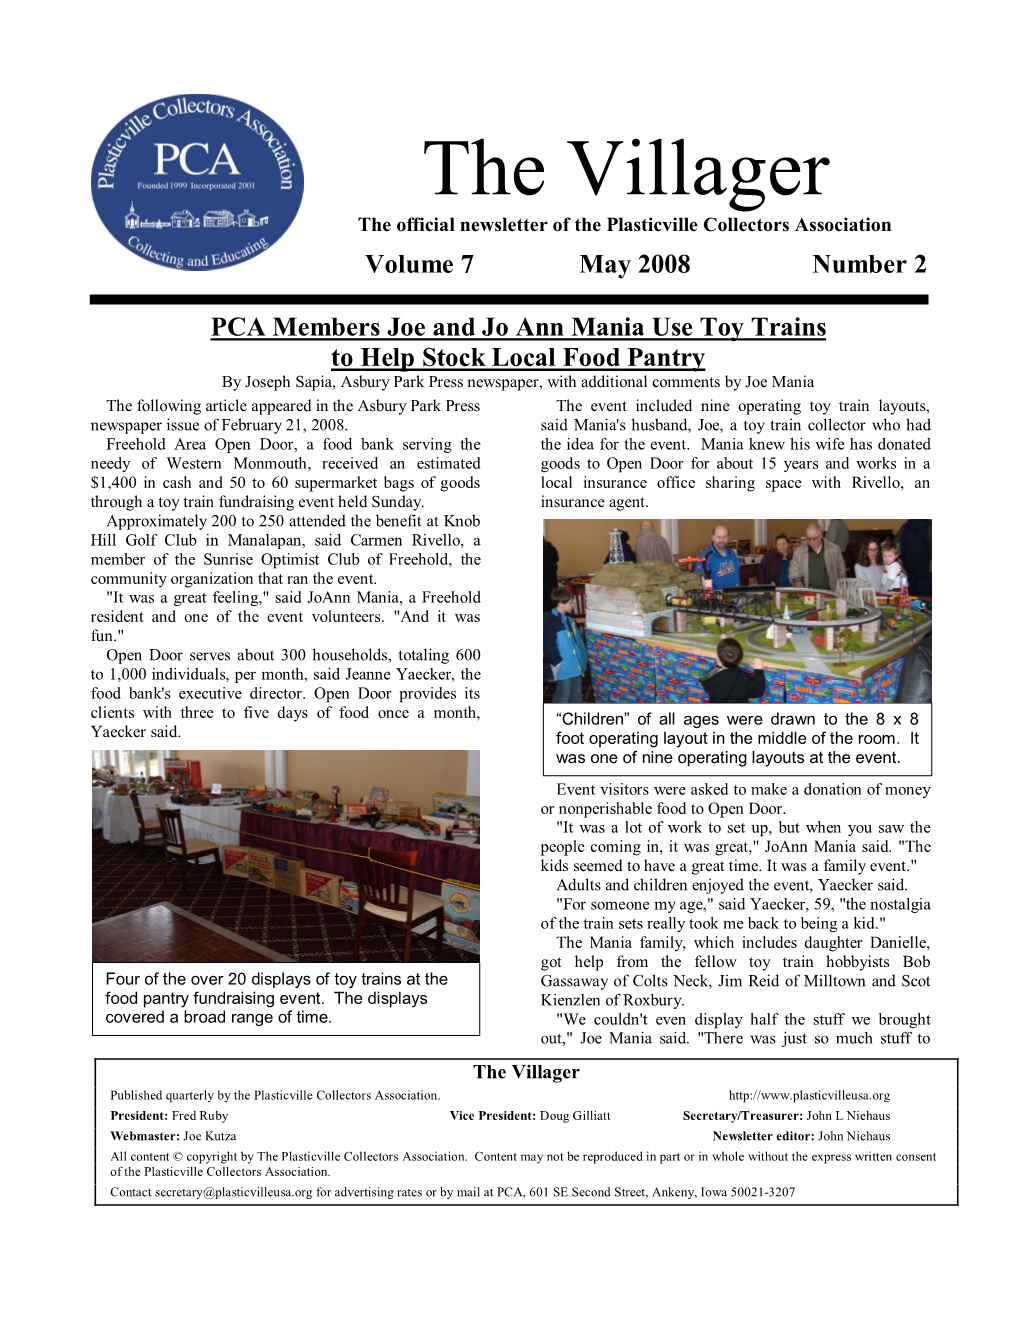 The Villager the Official Newsletter of the Plasticville Collectors Association Volume 7 May 2008 Number 2